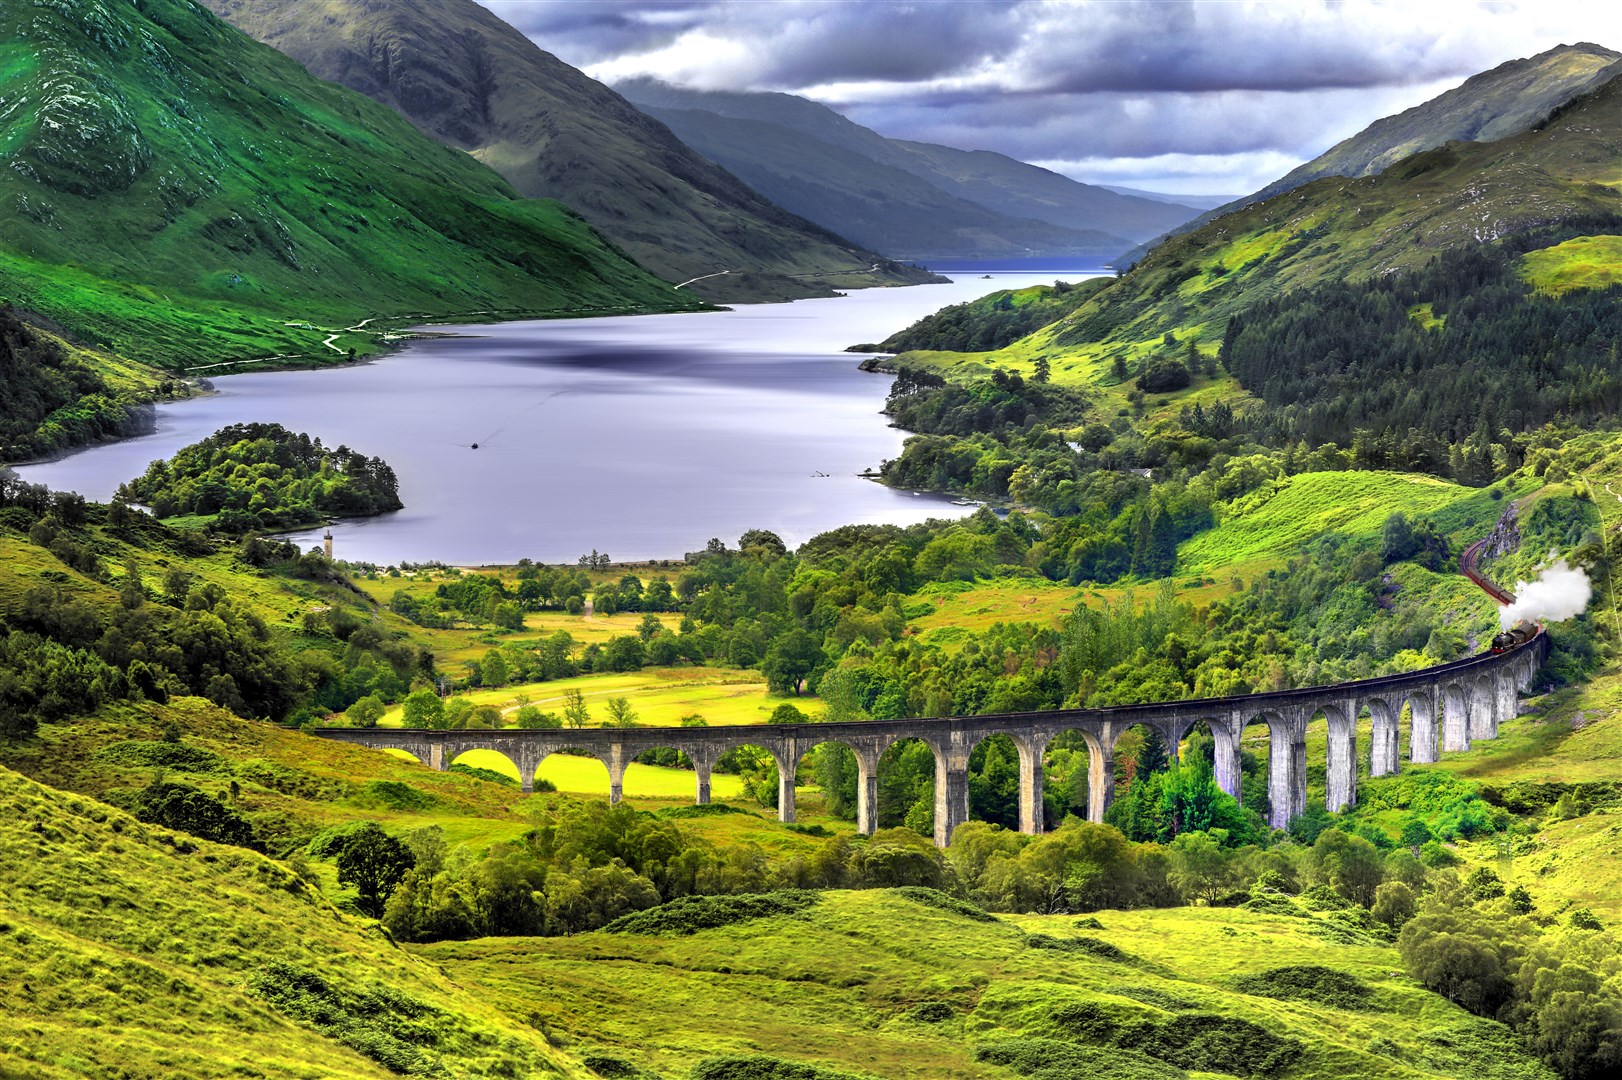 The Glenfinnan Viaduct which has been made even more famous by the Harry Potter movies.